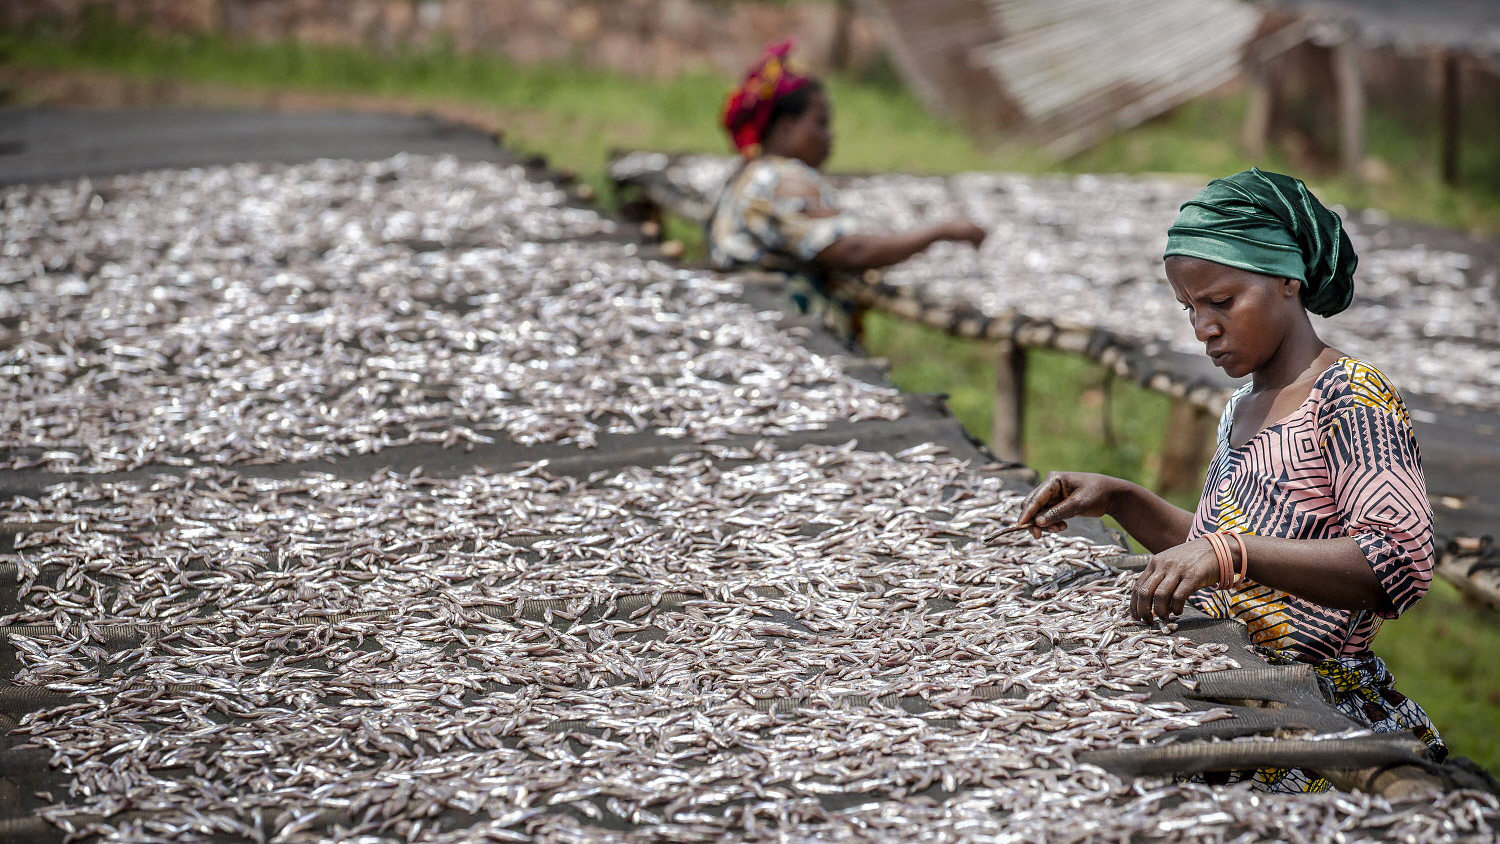 Tanzania - A woman puts fresh sprat to sun dry in a drying area next to the shore of the Lake Tanganyika in Kigoma